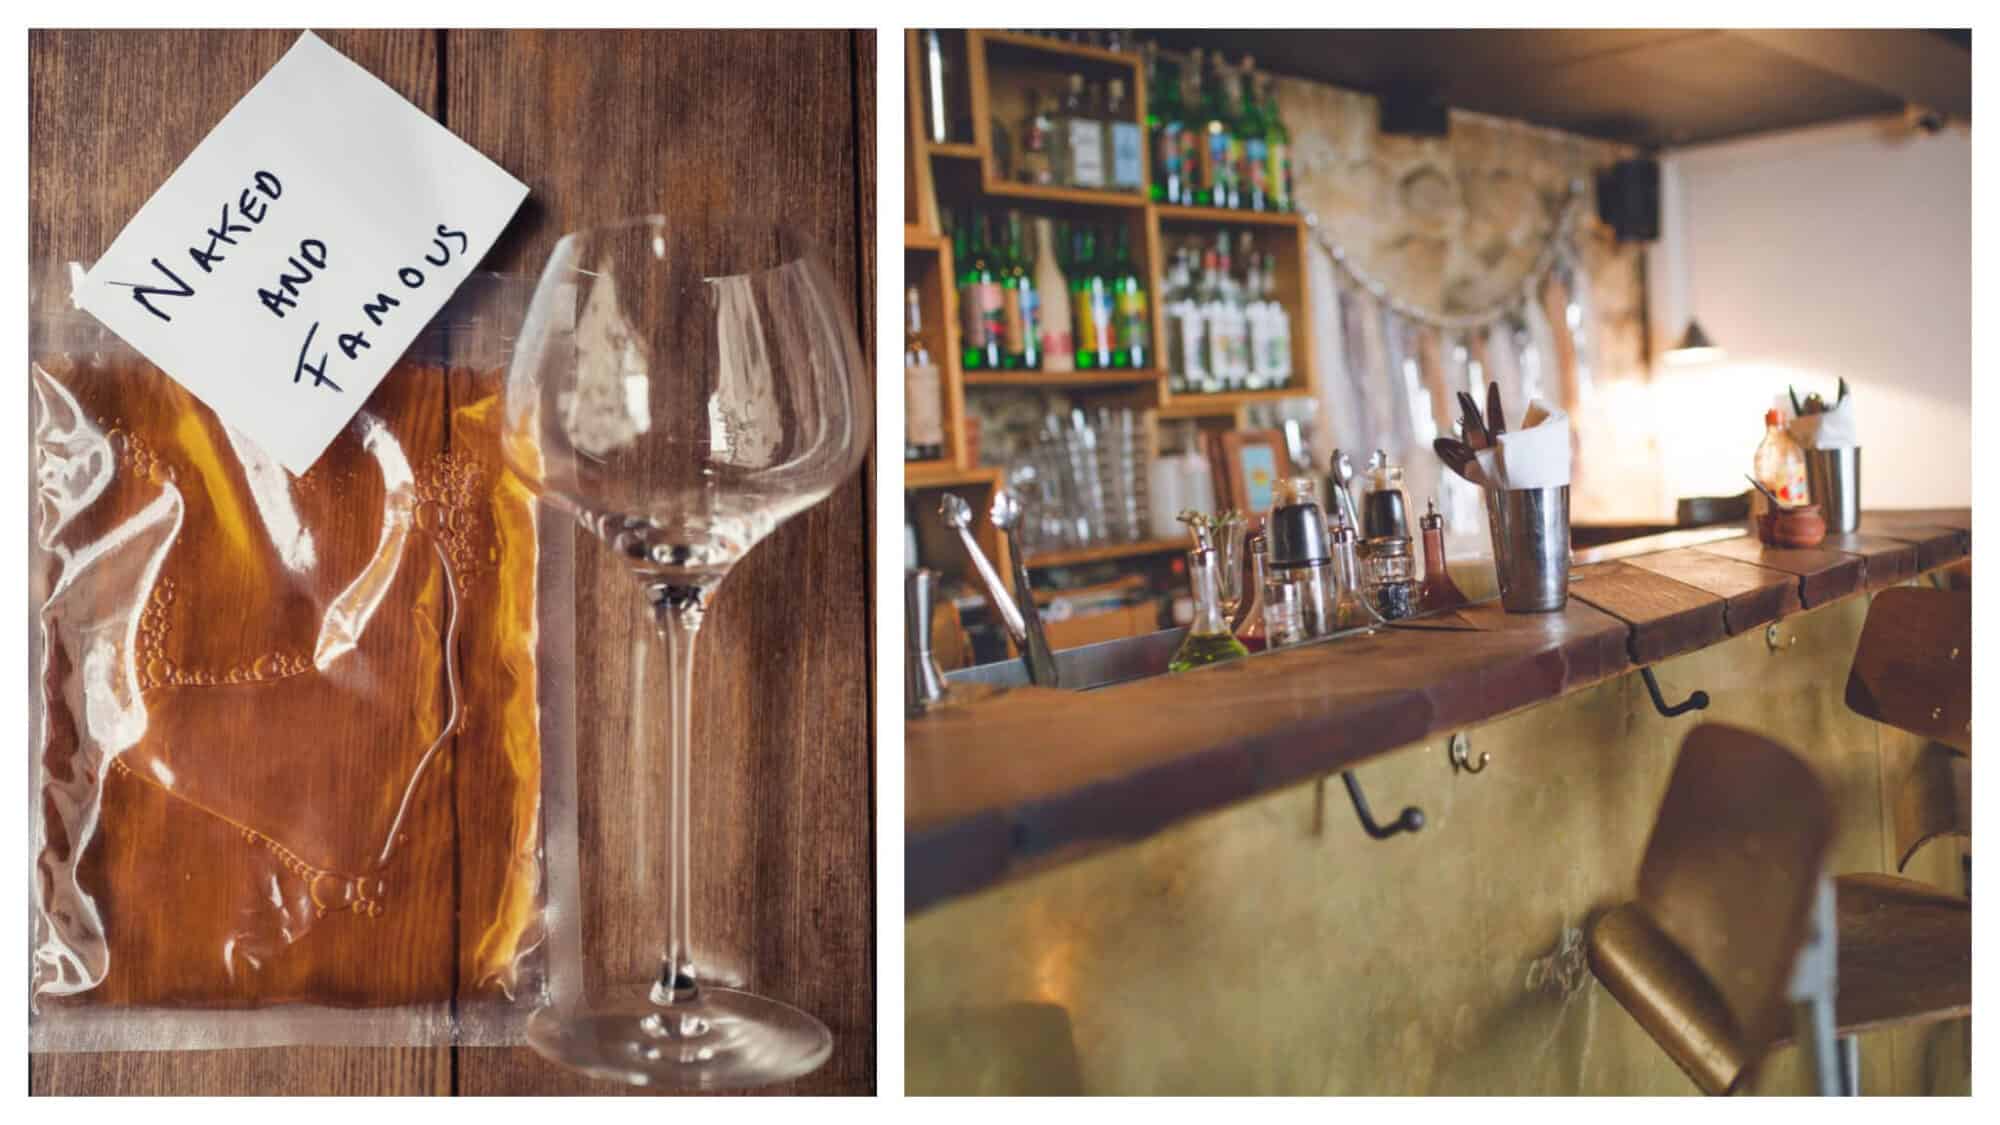 Left: A wine glass on a wooden table next to a pouch of wine. Right: the bar at Candelaria in Paris. 